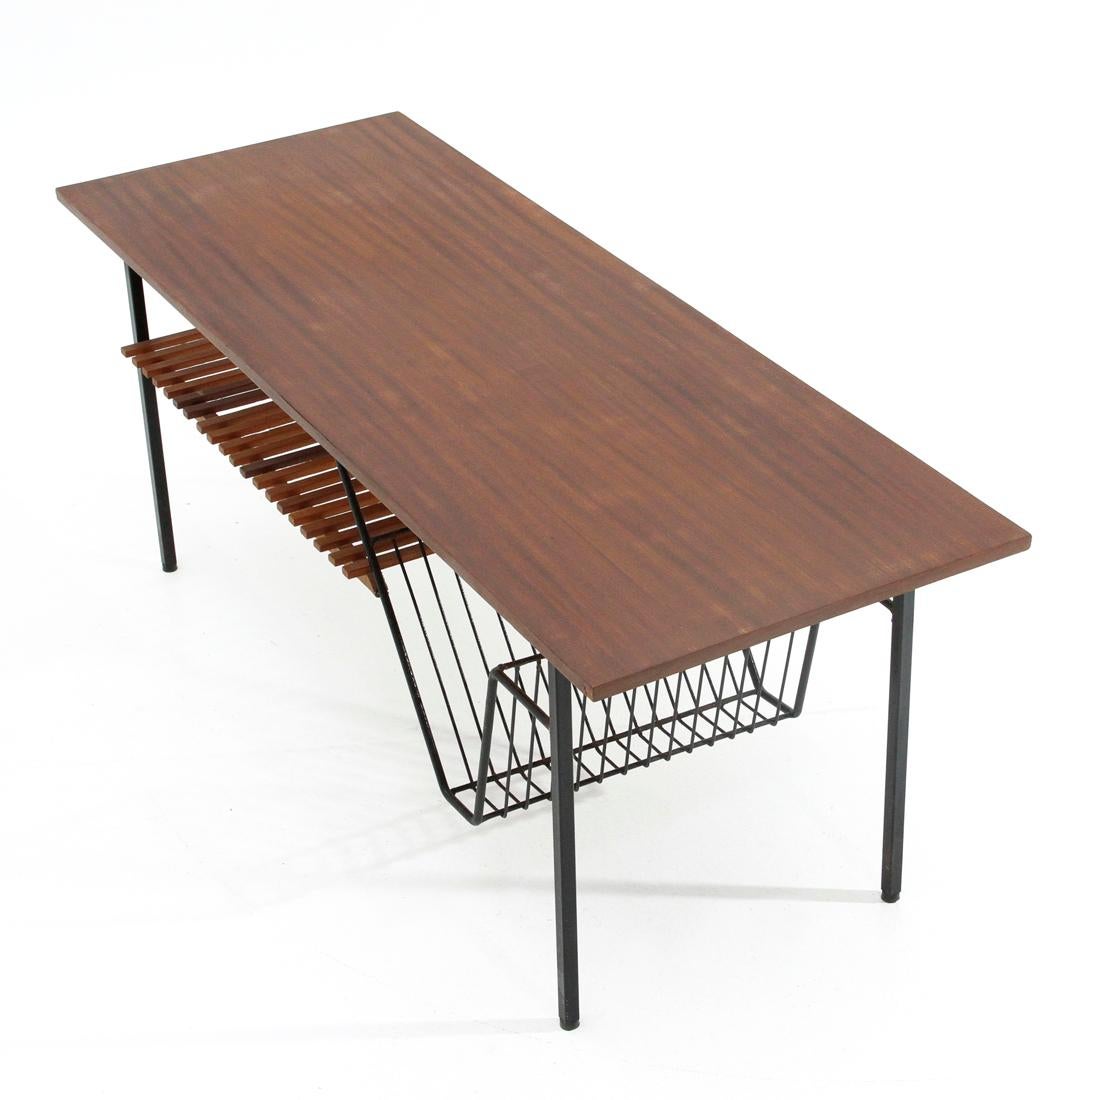 Italian-made coffee table produced in the 1960s.
Structure in black painted metal.
Top in teak veneered wood.
Lower shelf in teak slats.
Rubber feet.
Good general conditions, some signs due to normal use over time.

Dimensions: Length 110 cm,